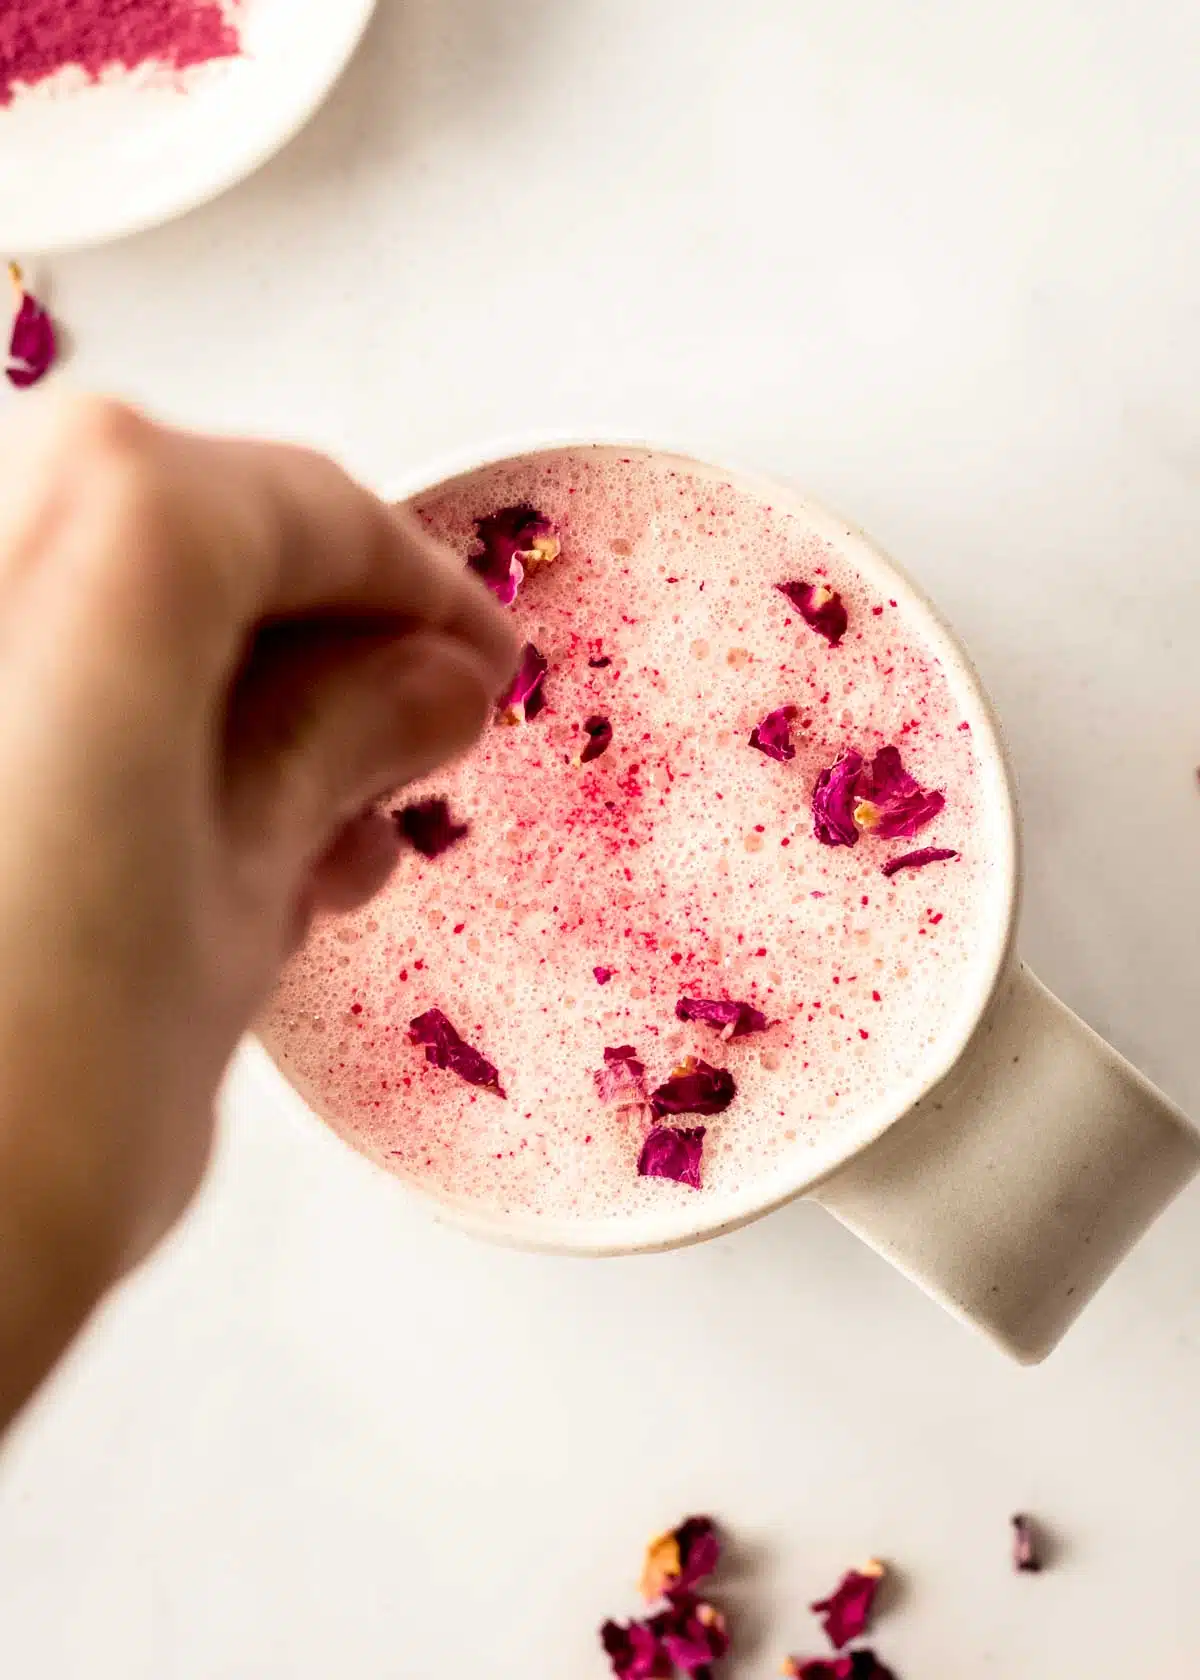 A woman's hand decorates the surface of a rose latte with pink rose petals and beetroot powder.